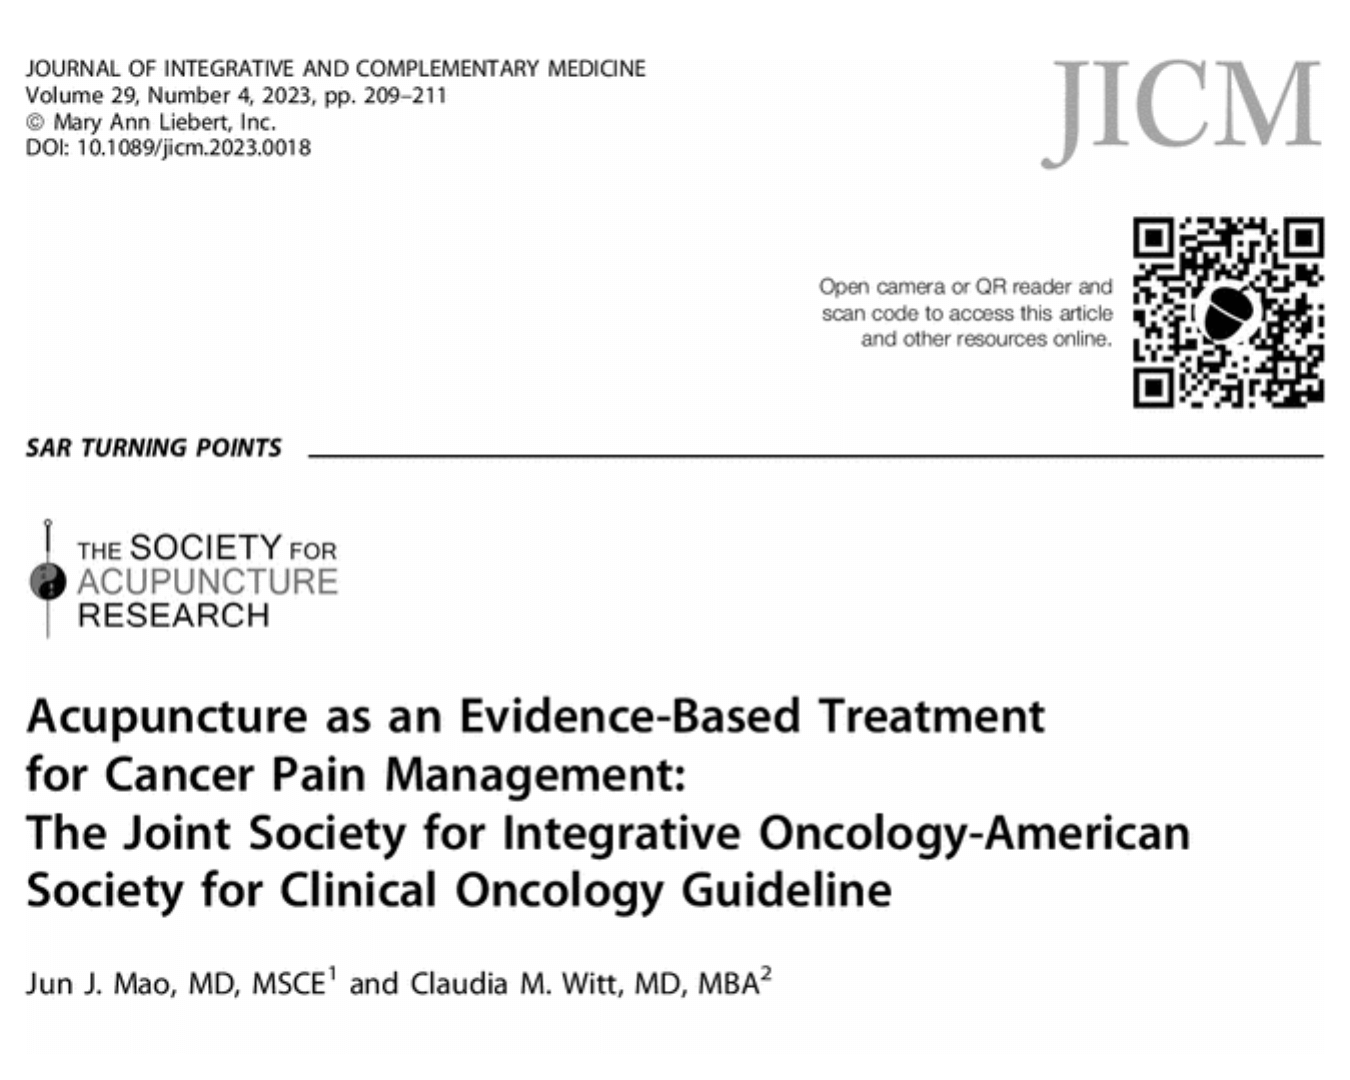 Acupuncture as an Evidence-Based Treatment for Cancer Pain Management: The Joint Society for Integrative Oncology-American Society for Clinical Oncology Guideline